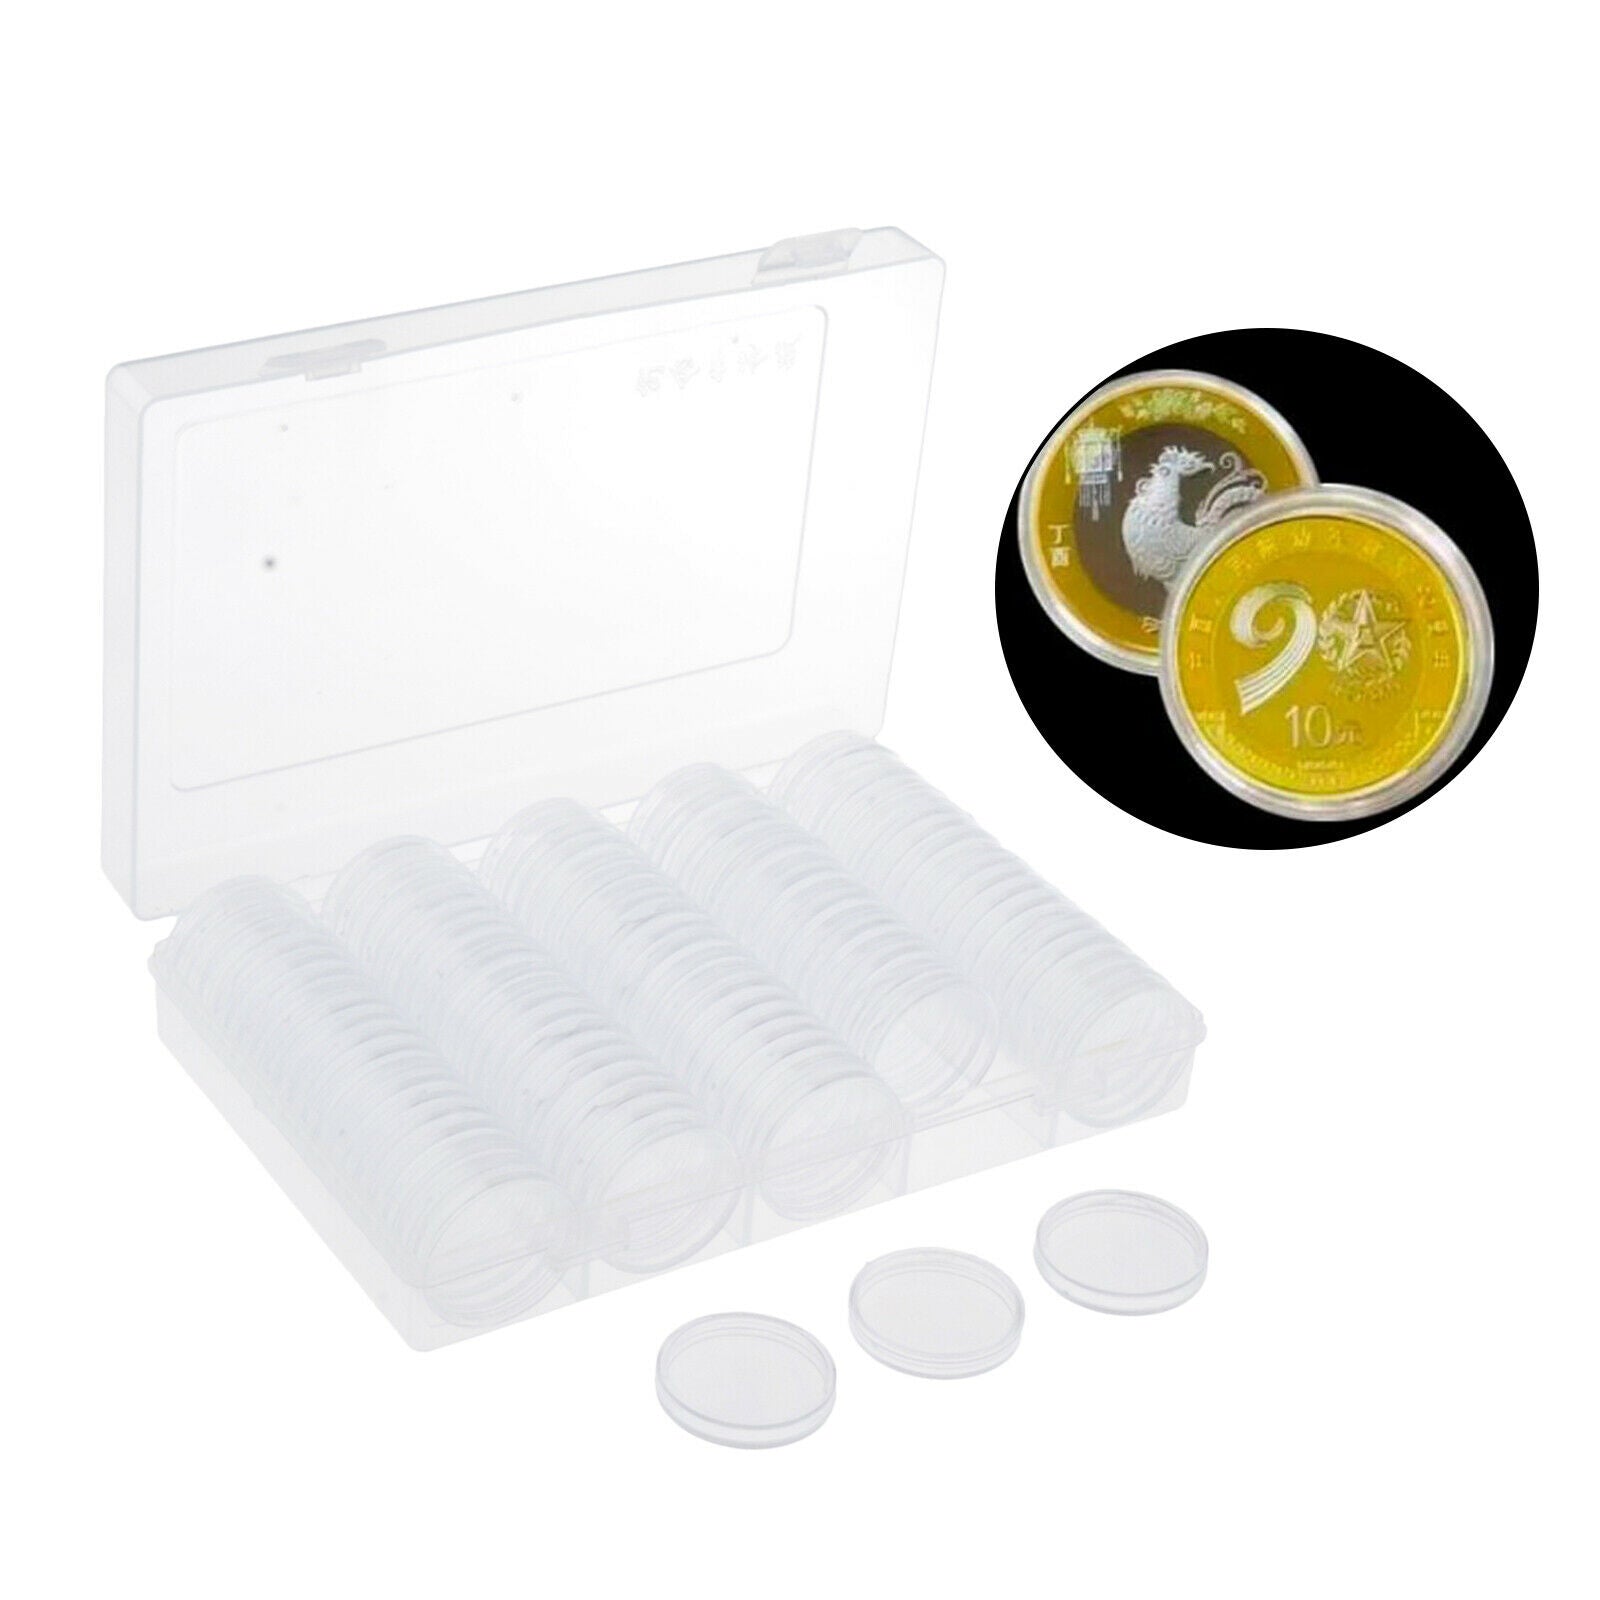 100x 25mm Coin Capsules w/Storage Organizer Box for Coin Collection Supplies